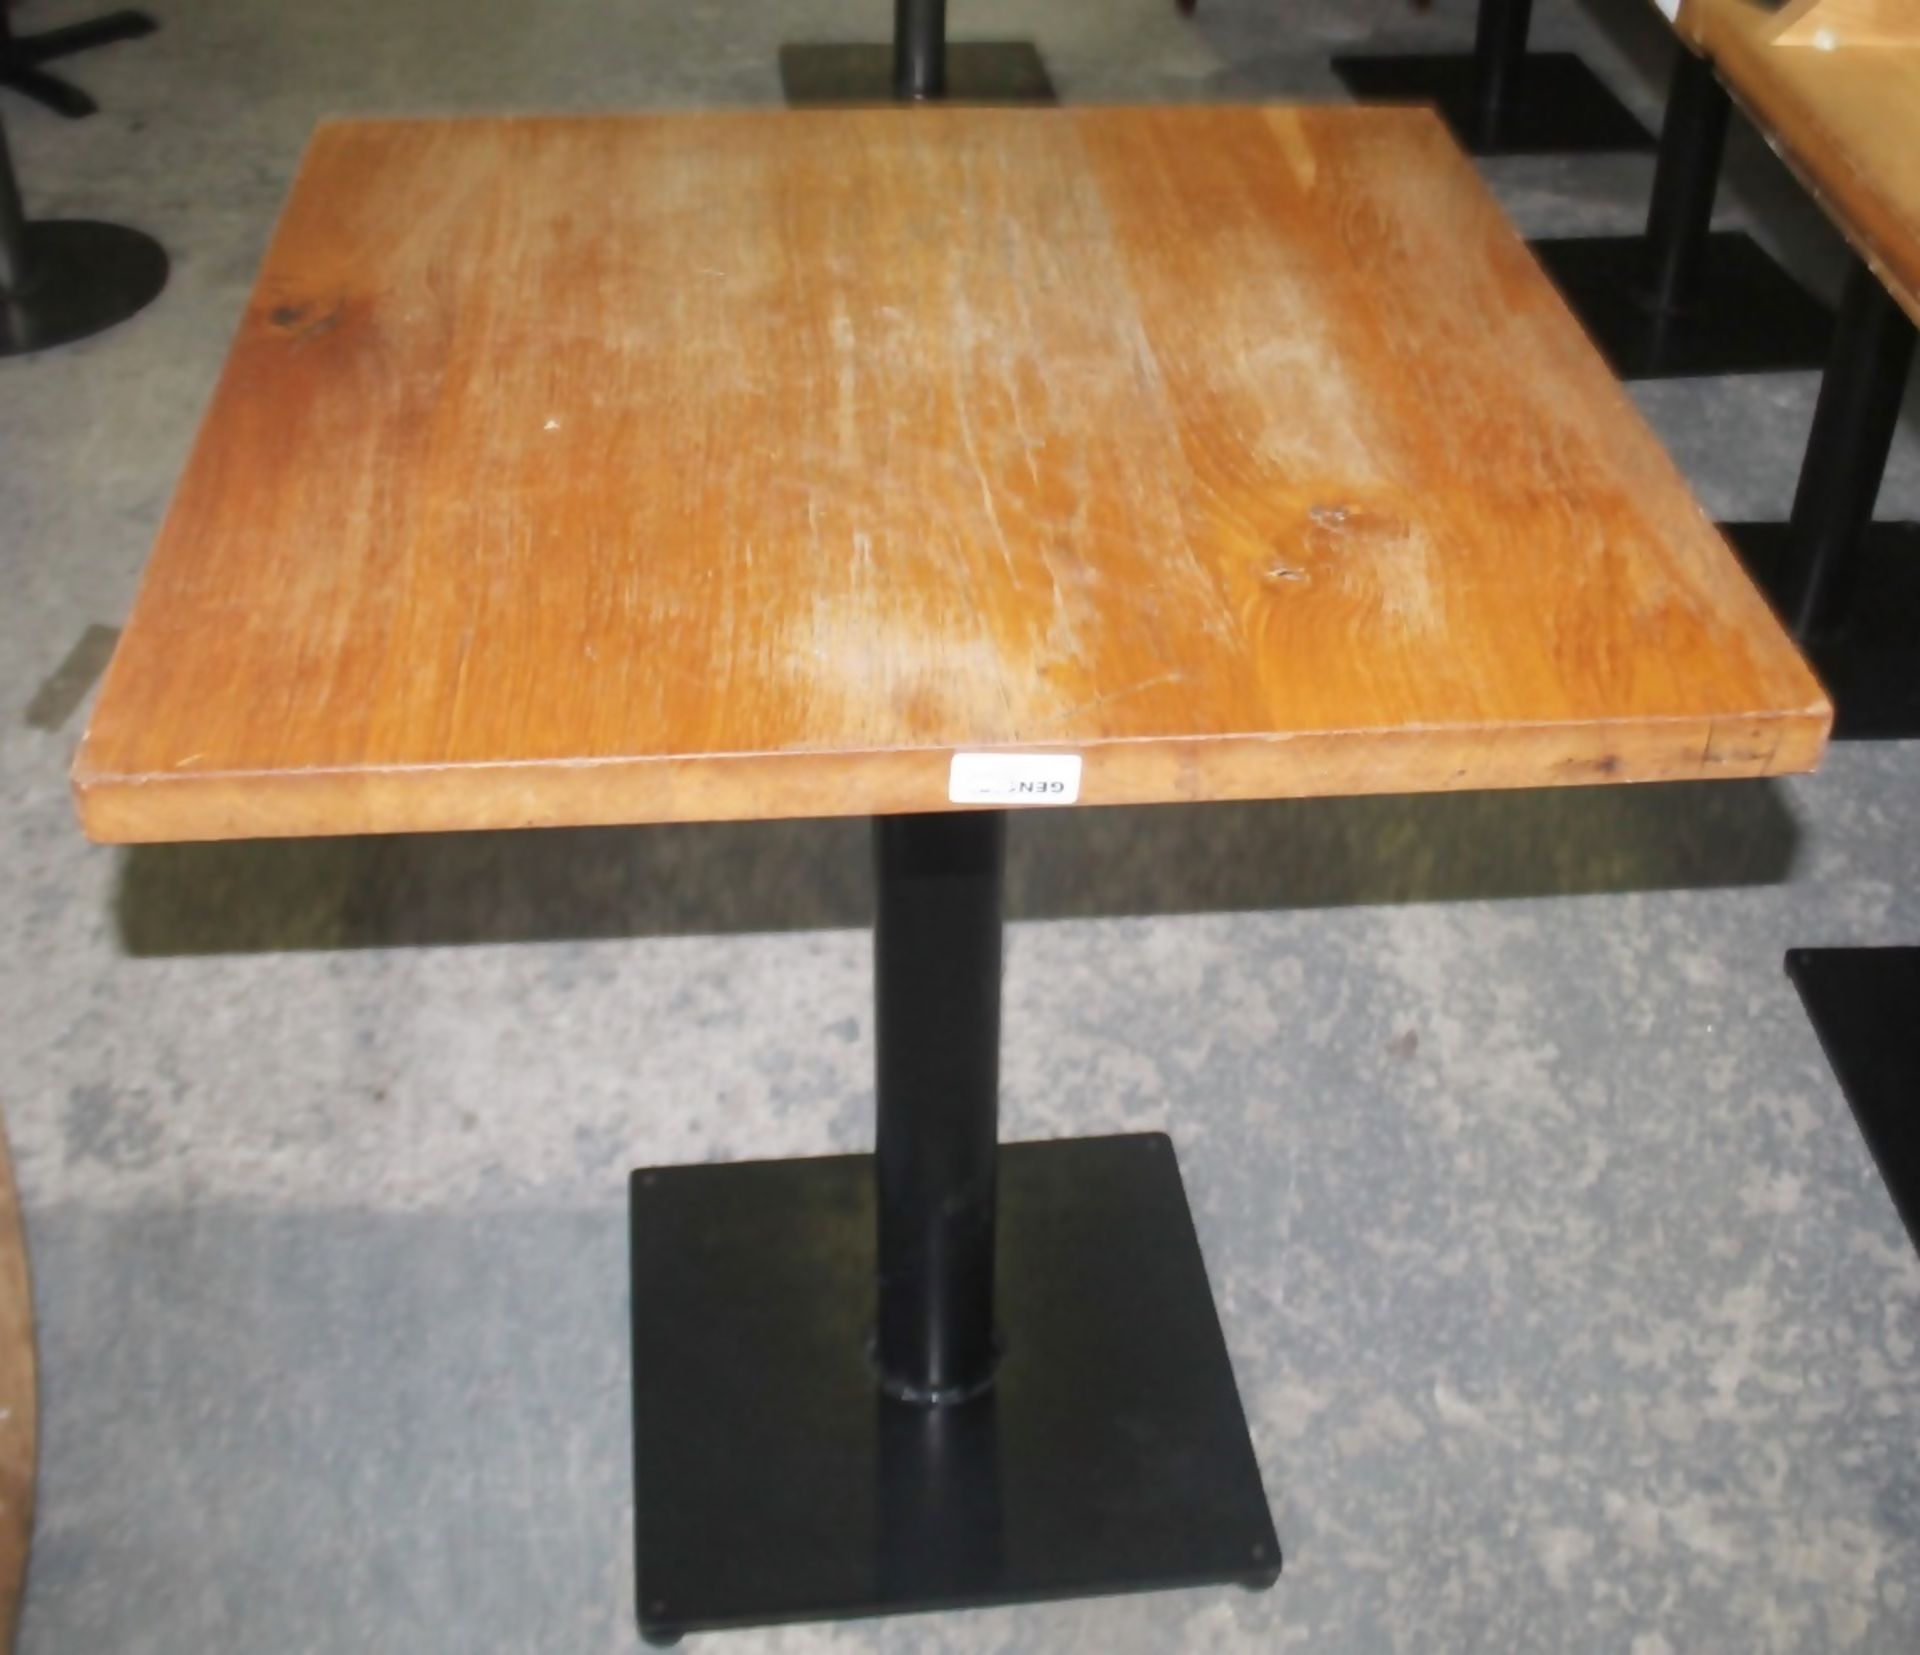 4 x Solid Oak Restaurant Dining Tables - Natural Rustic Knotty Oak Tops With Black Cast Iron Bases - - Image 8 of 8